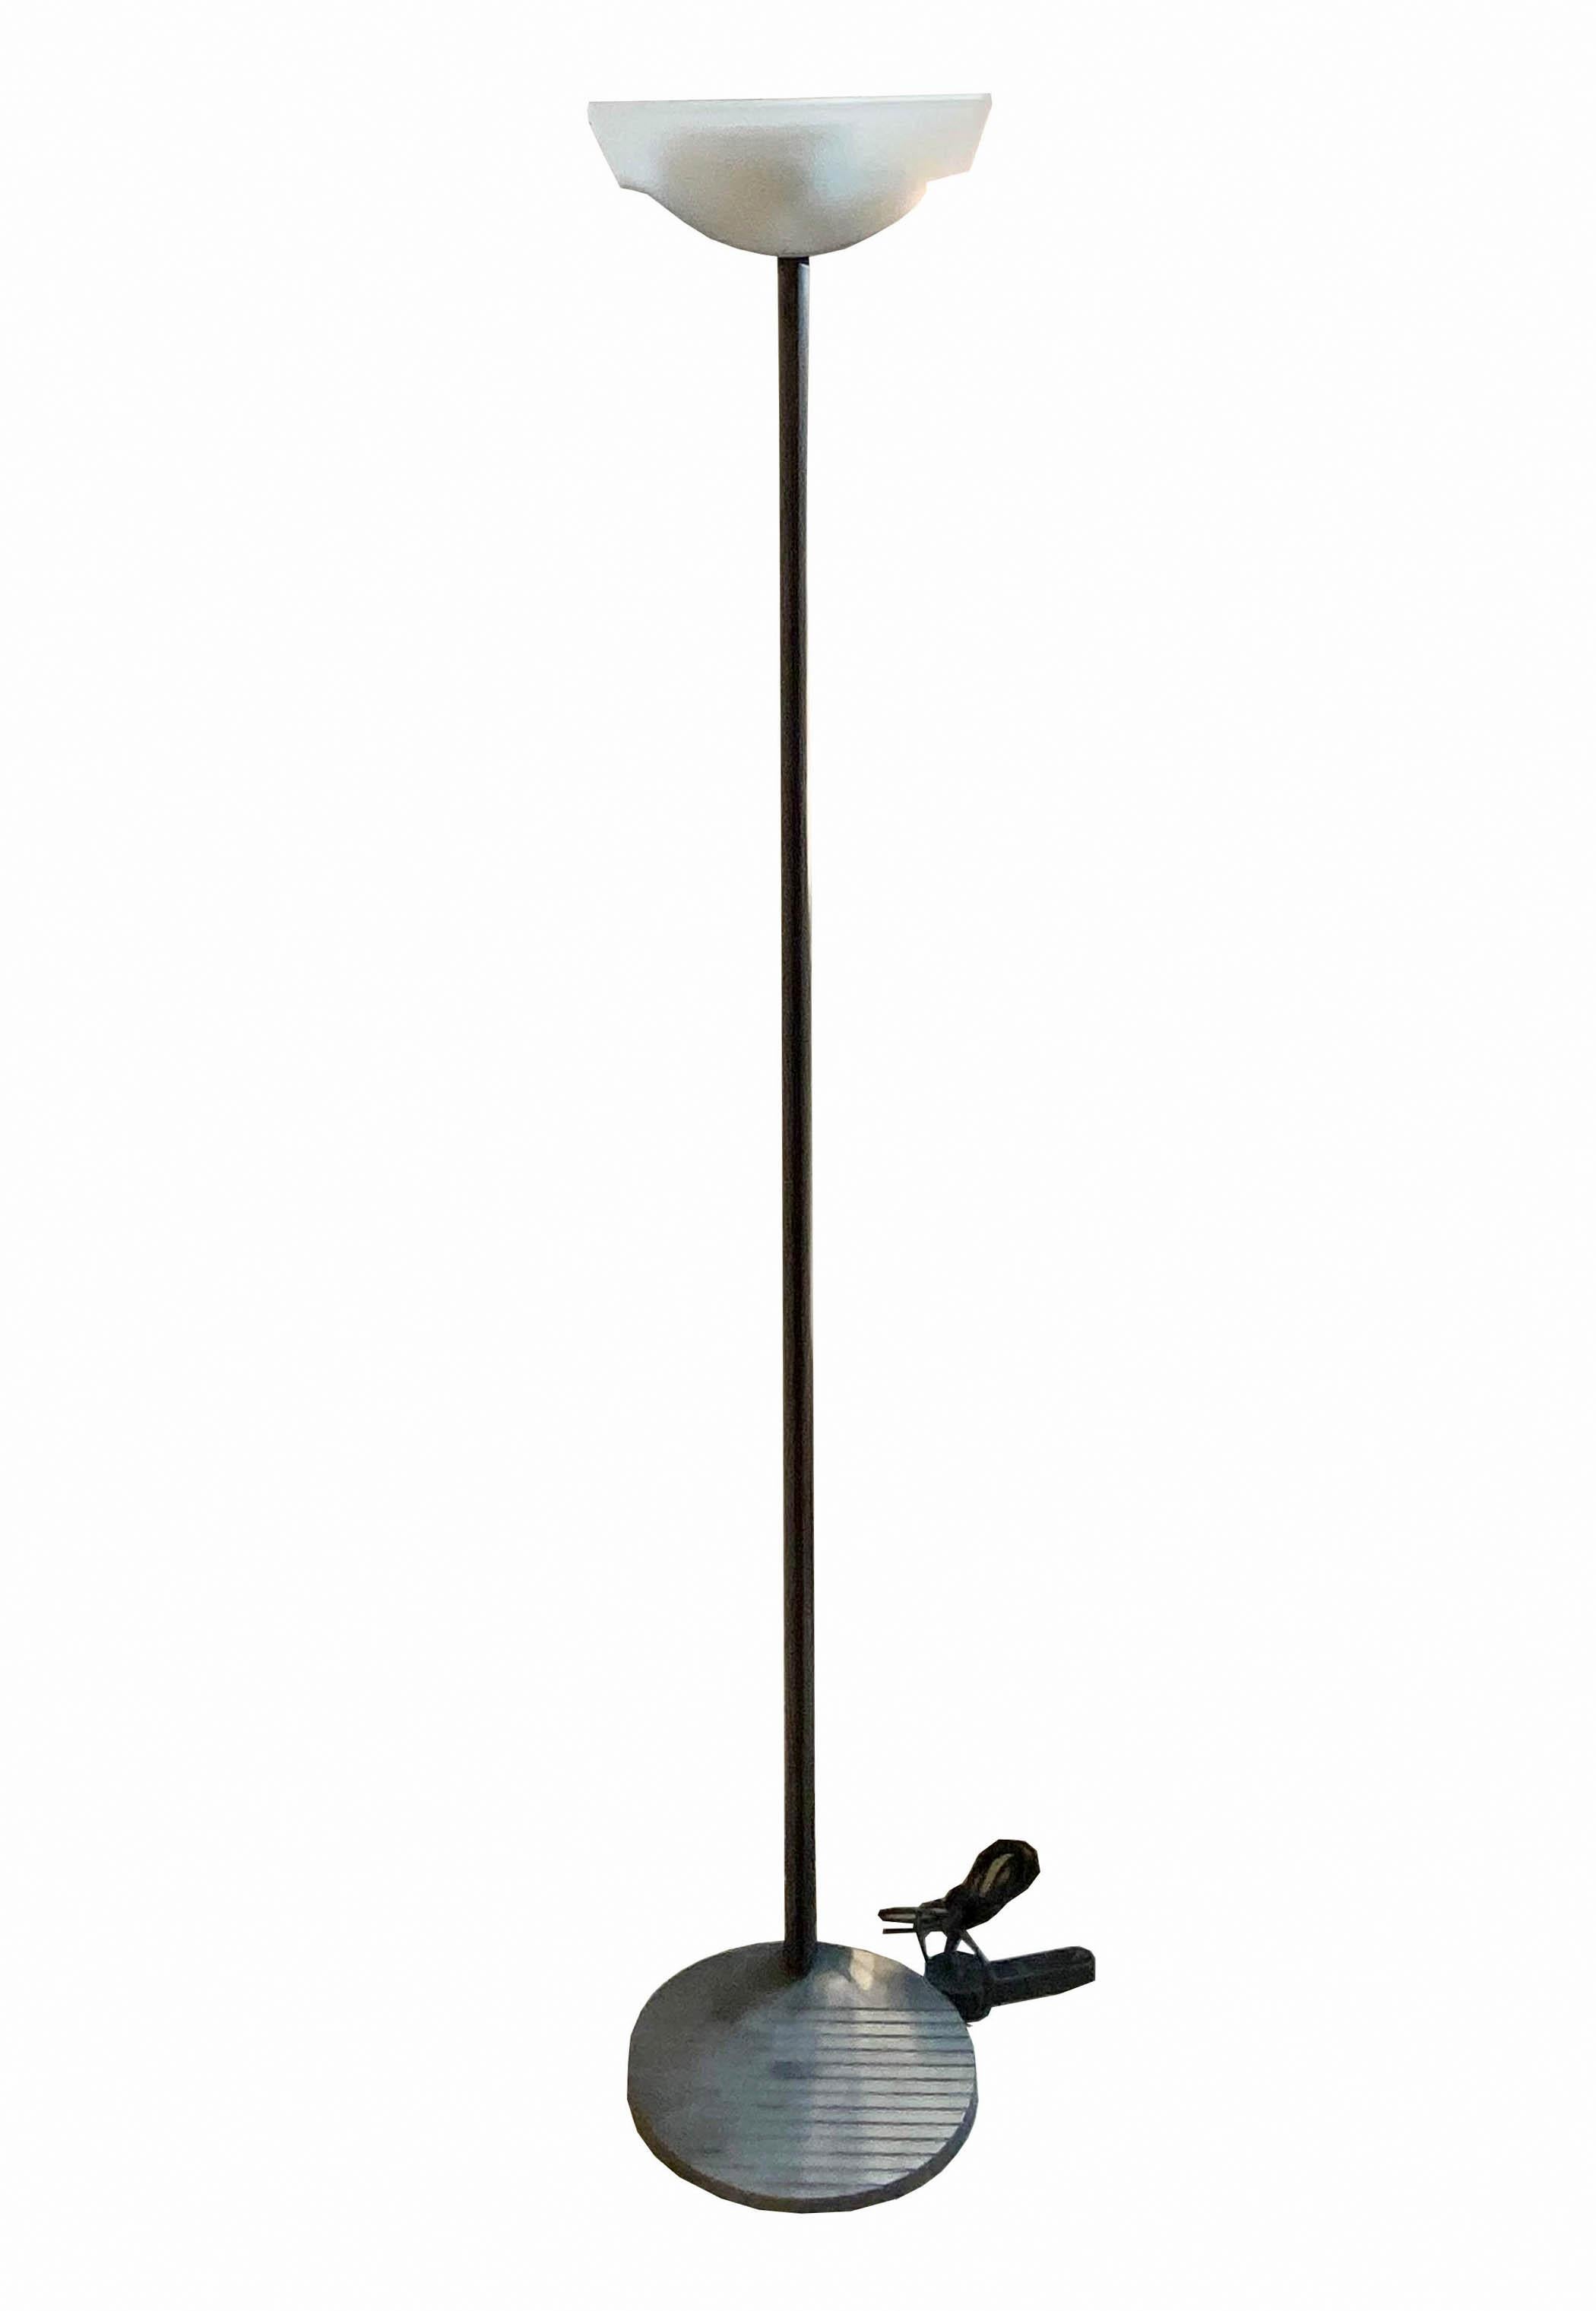 Floor lamp designed by Rodolfo Bonetto in black painted metal and opaline glass shade. Marked Evipar / Eviterra production Luci Italia 1970.